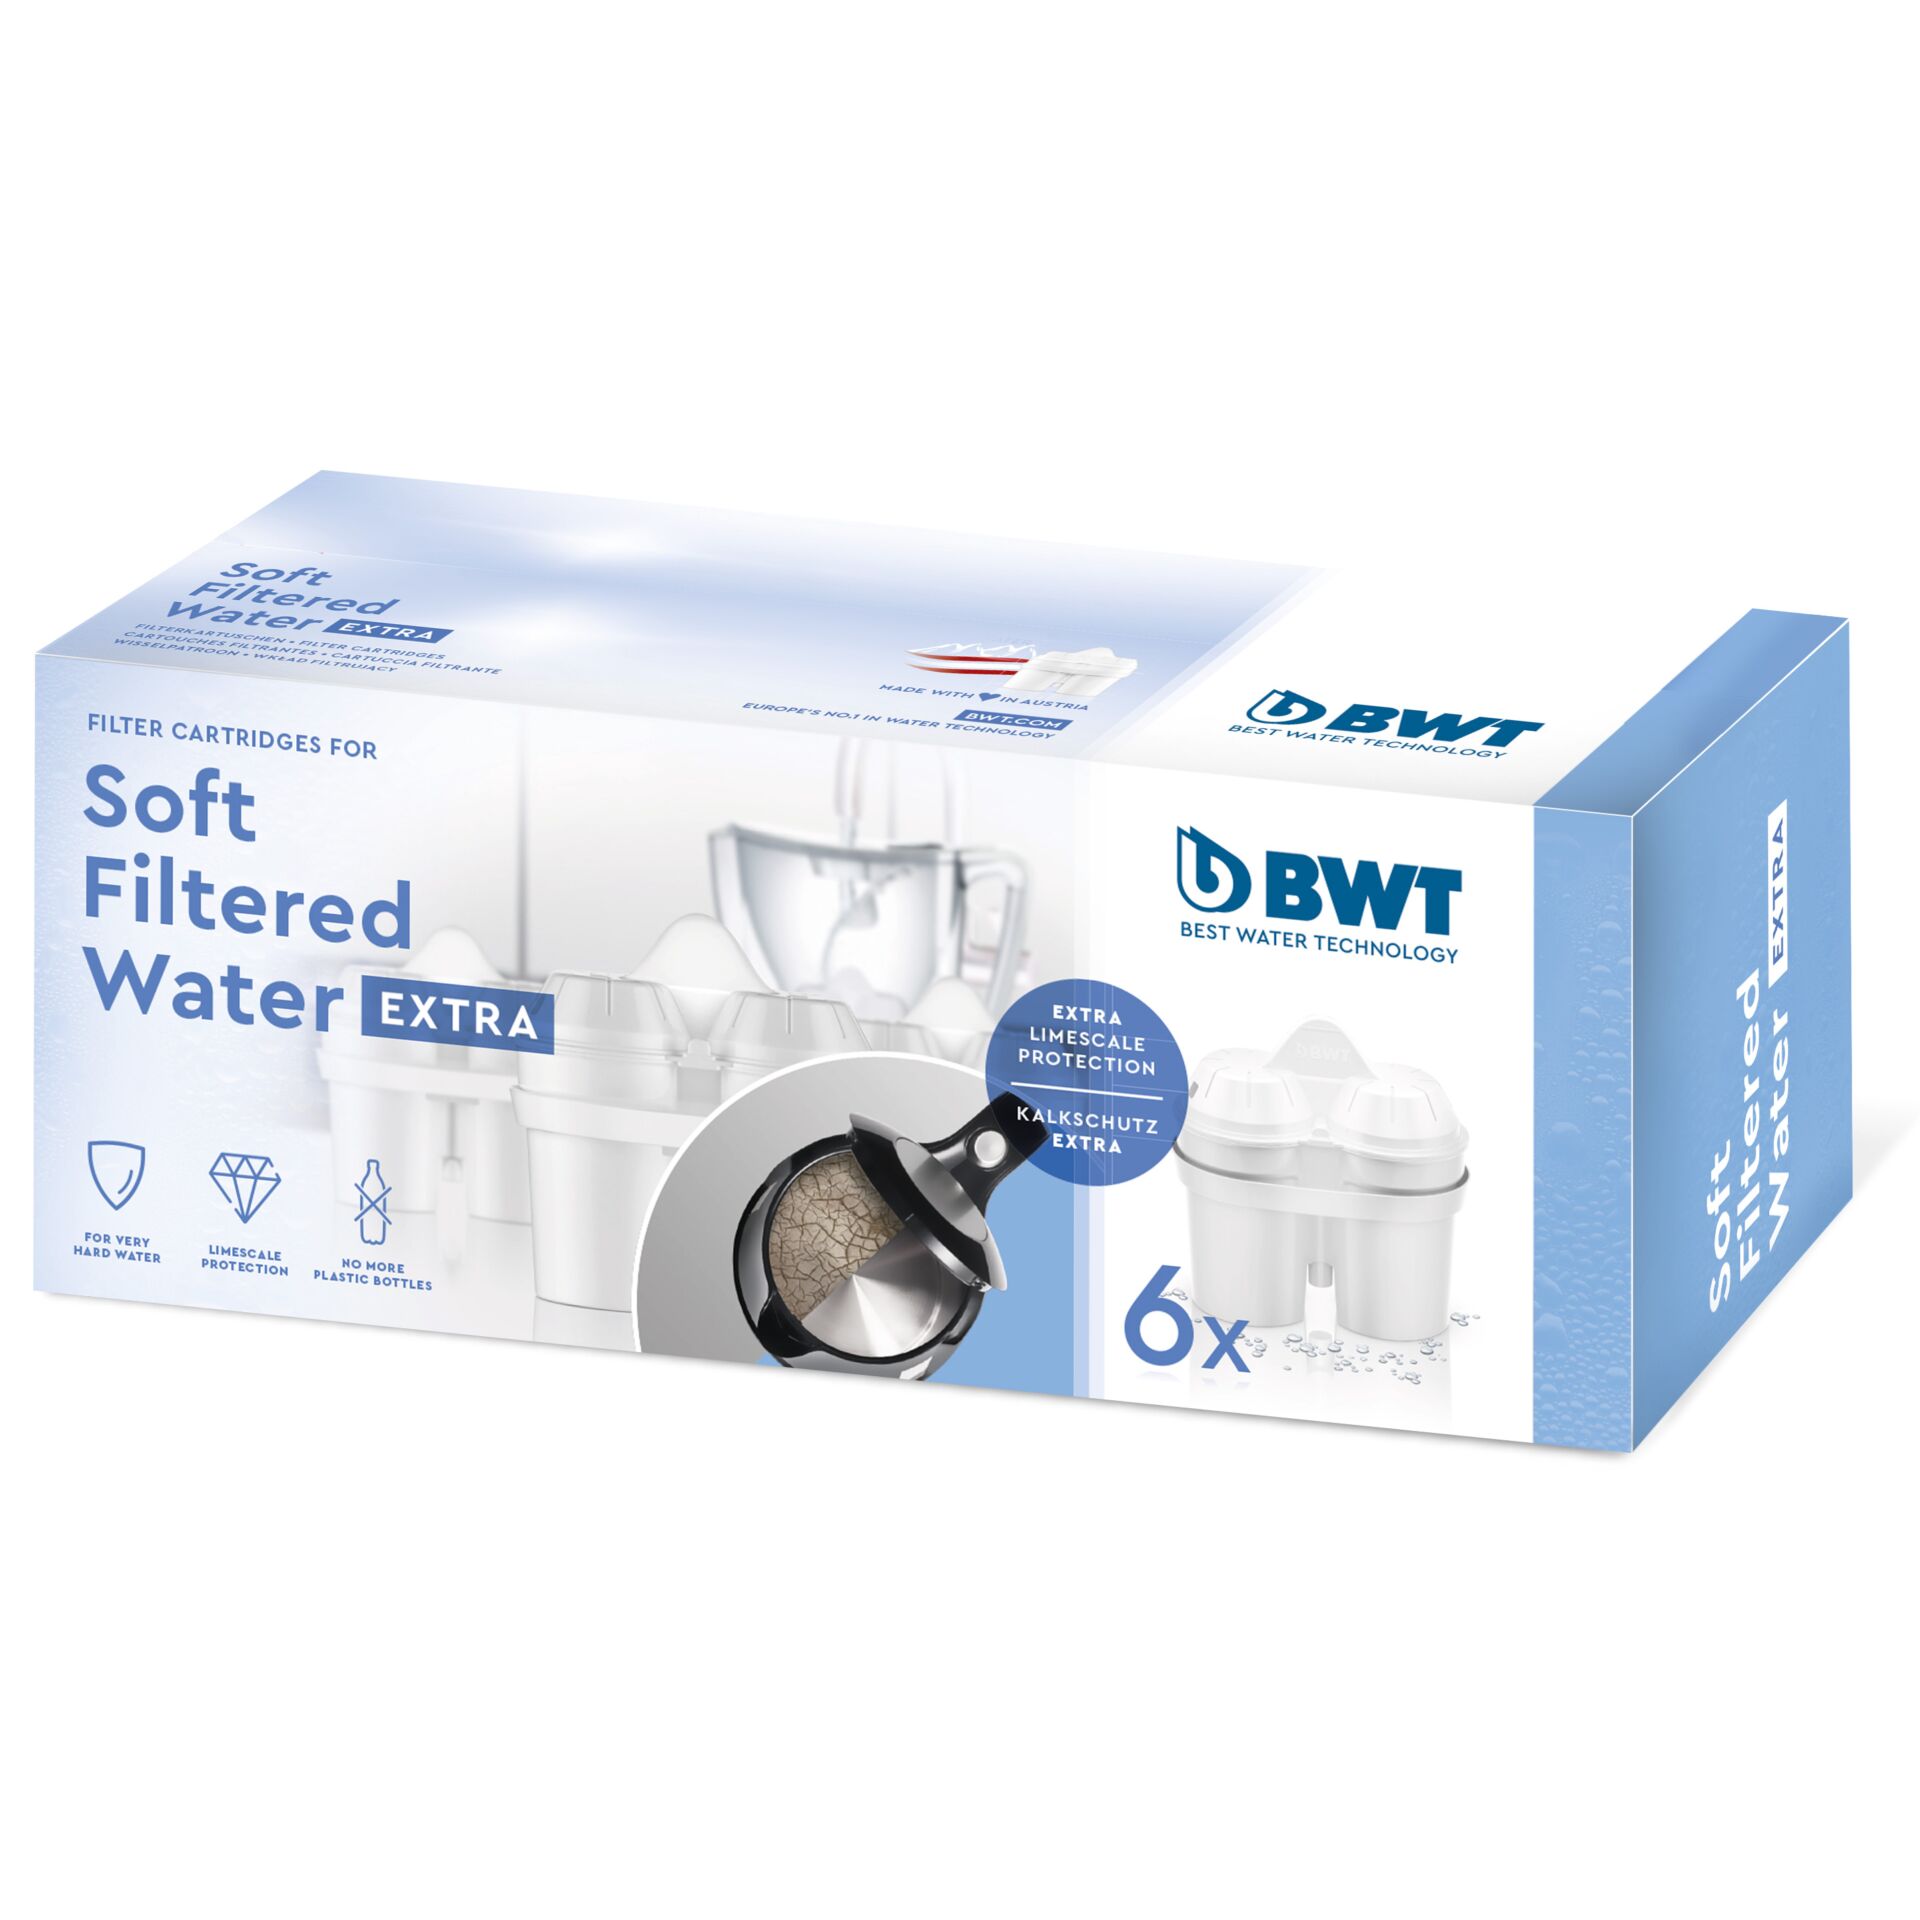 BWT 814873 6 pcs. Pack Soft Filtered Water EXTRA